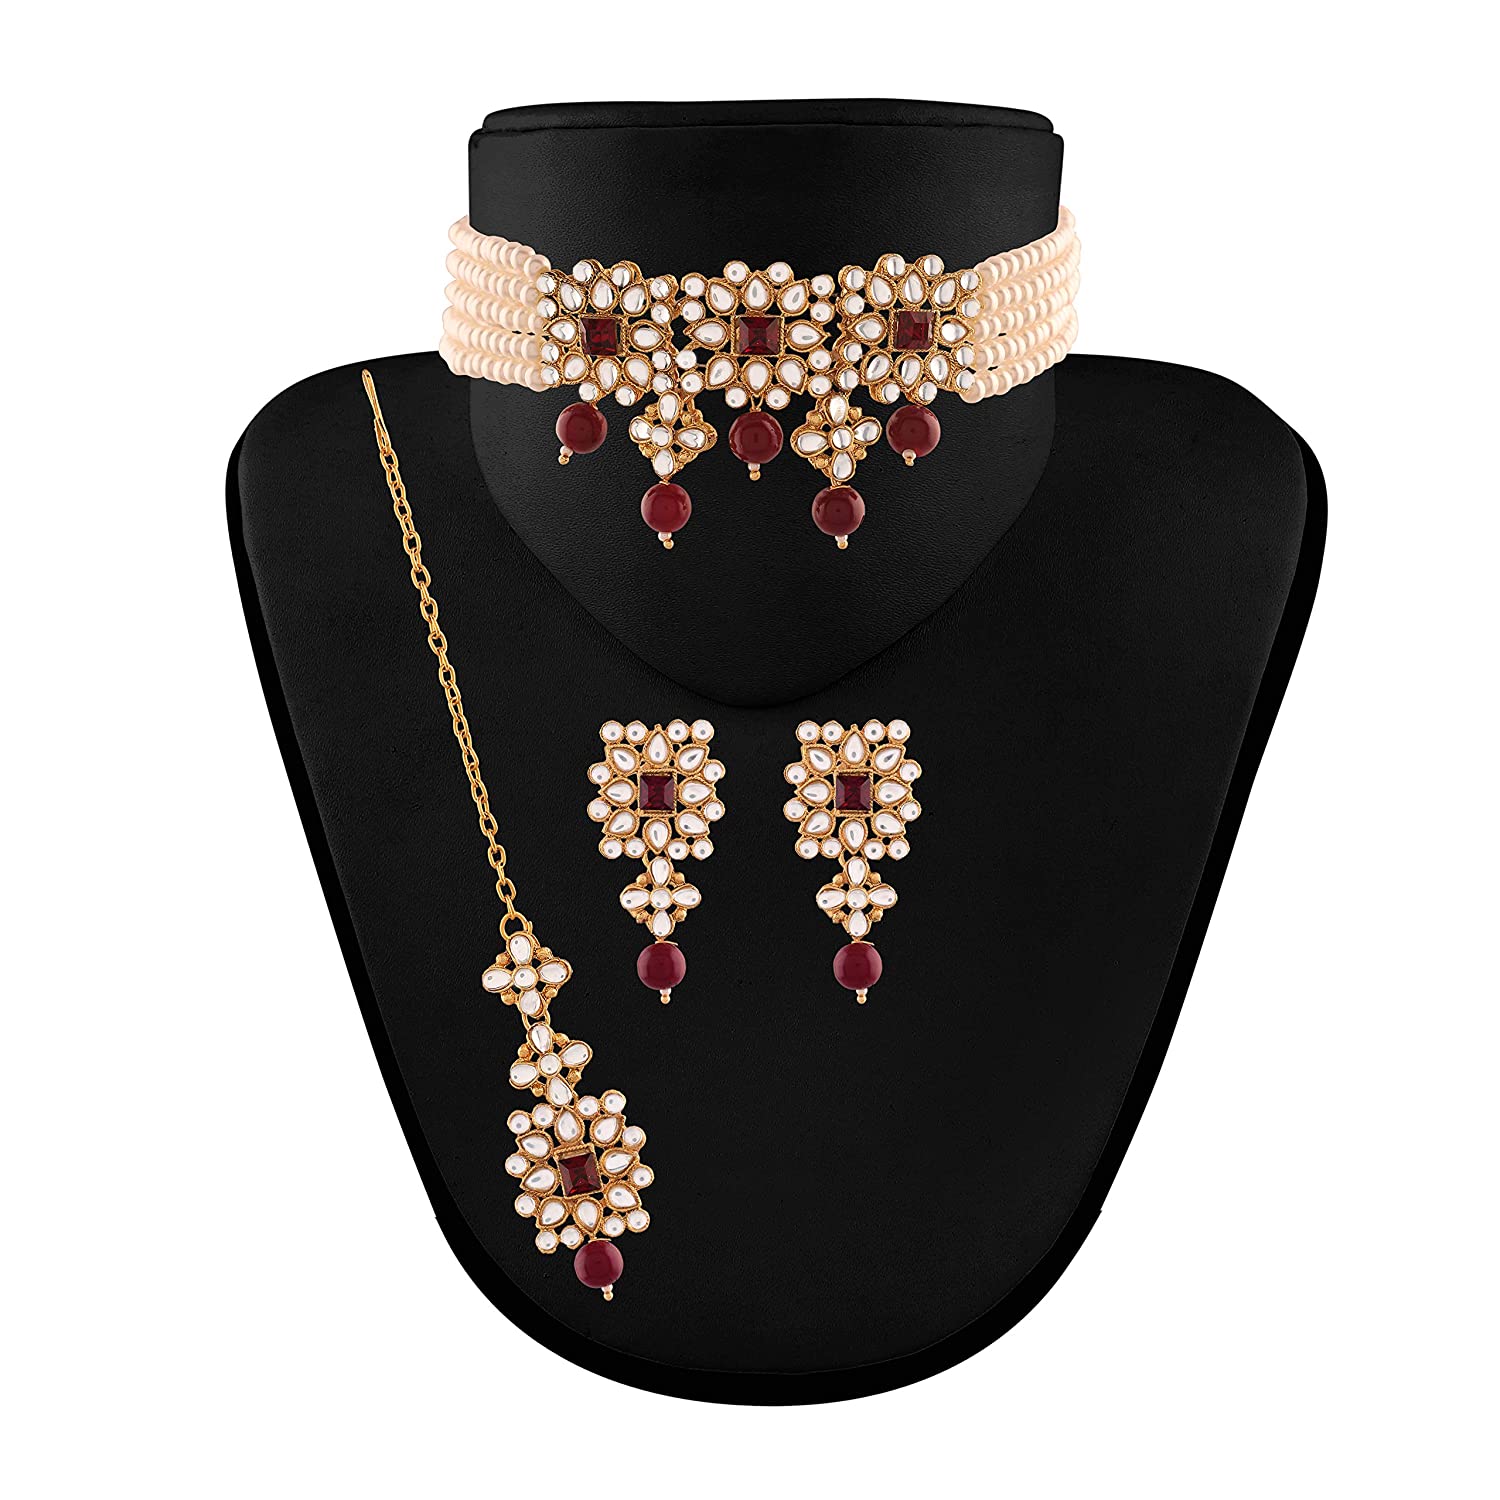 Women's Gold Plated White & Maroon Pearl & Kundan Studded Choker Necklace Set with Earrings & Maang Tikka - i jewels